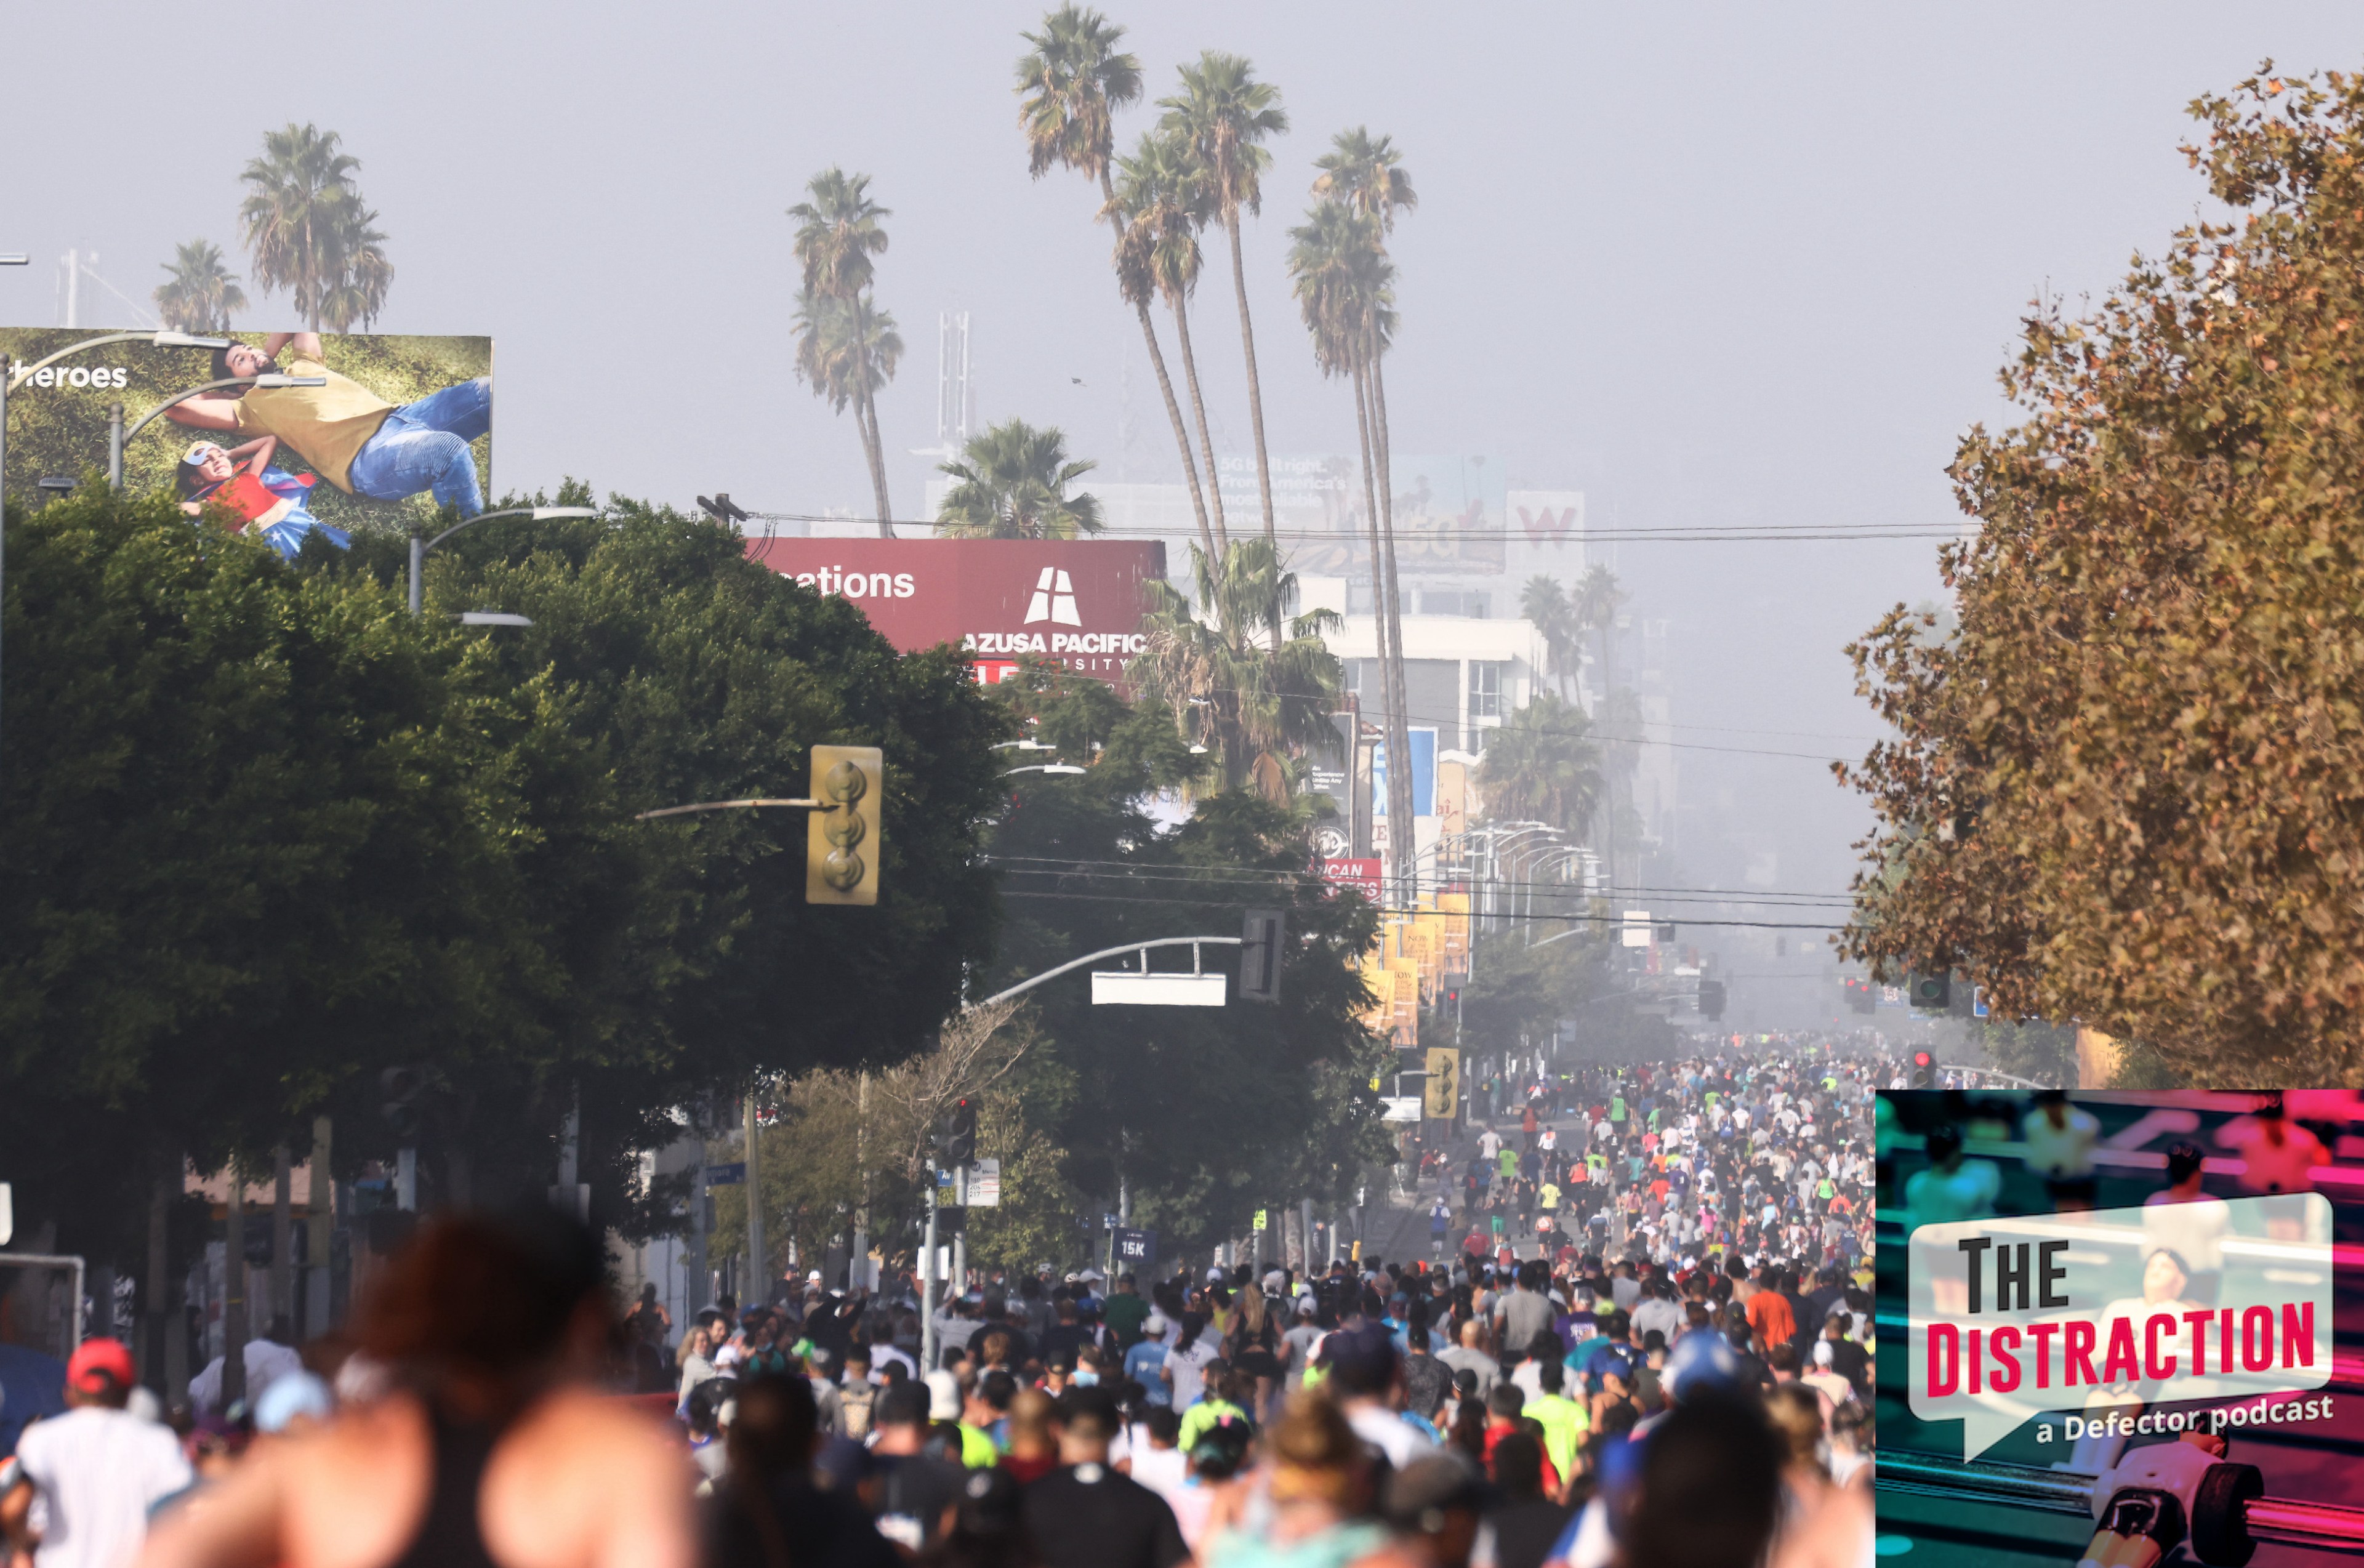 The Los Angeles Marathon making its way down Hollywood Boulevard in 2021.